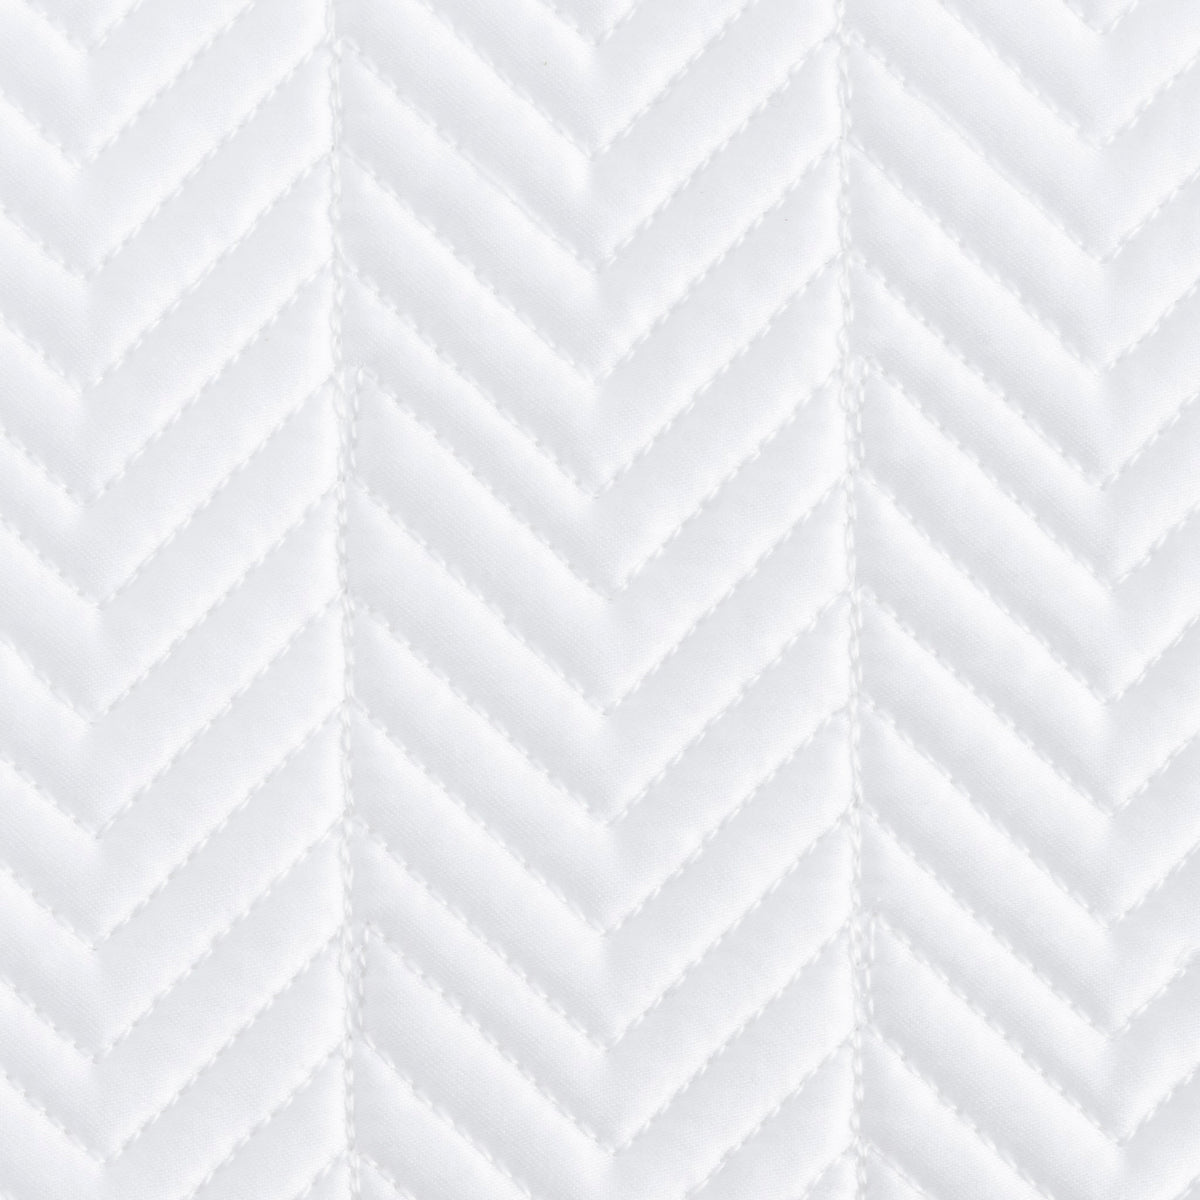 Swatch Sample of Matouk Netto Bedding in White Color